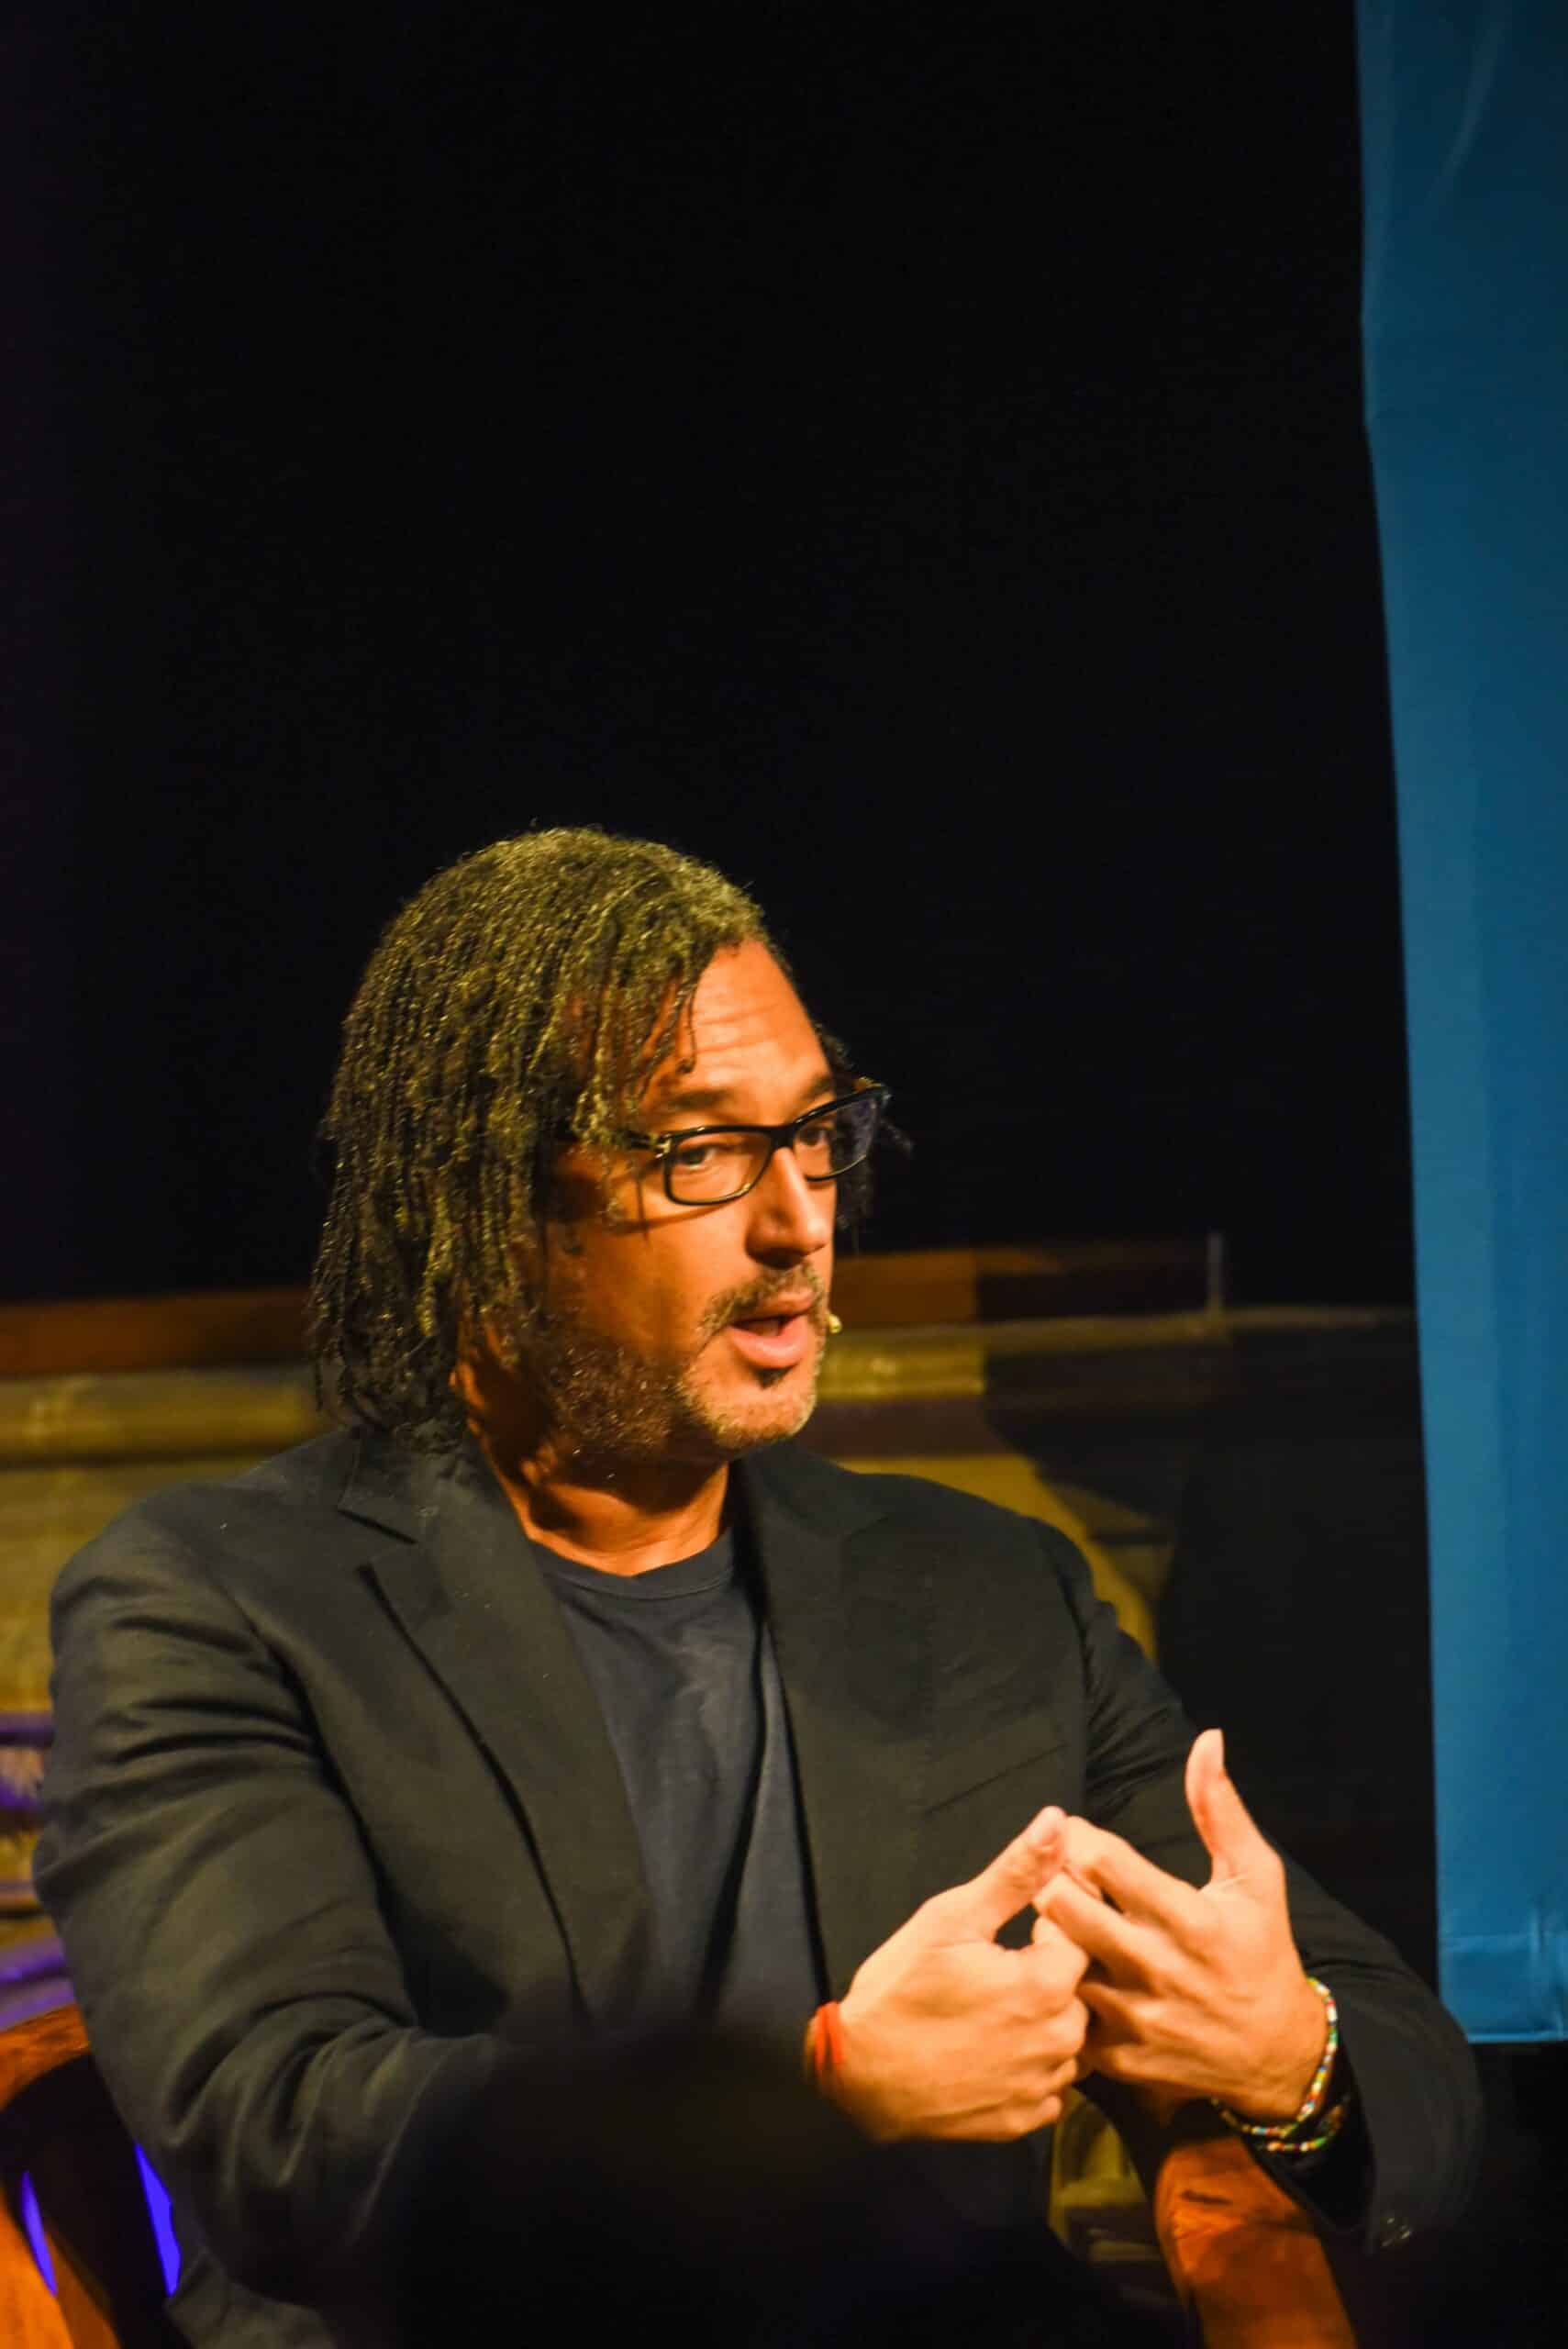 David Olusoga on stage at the festival